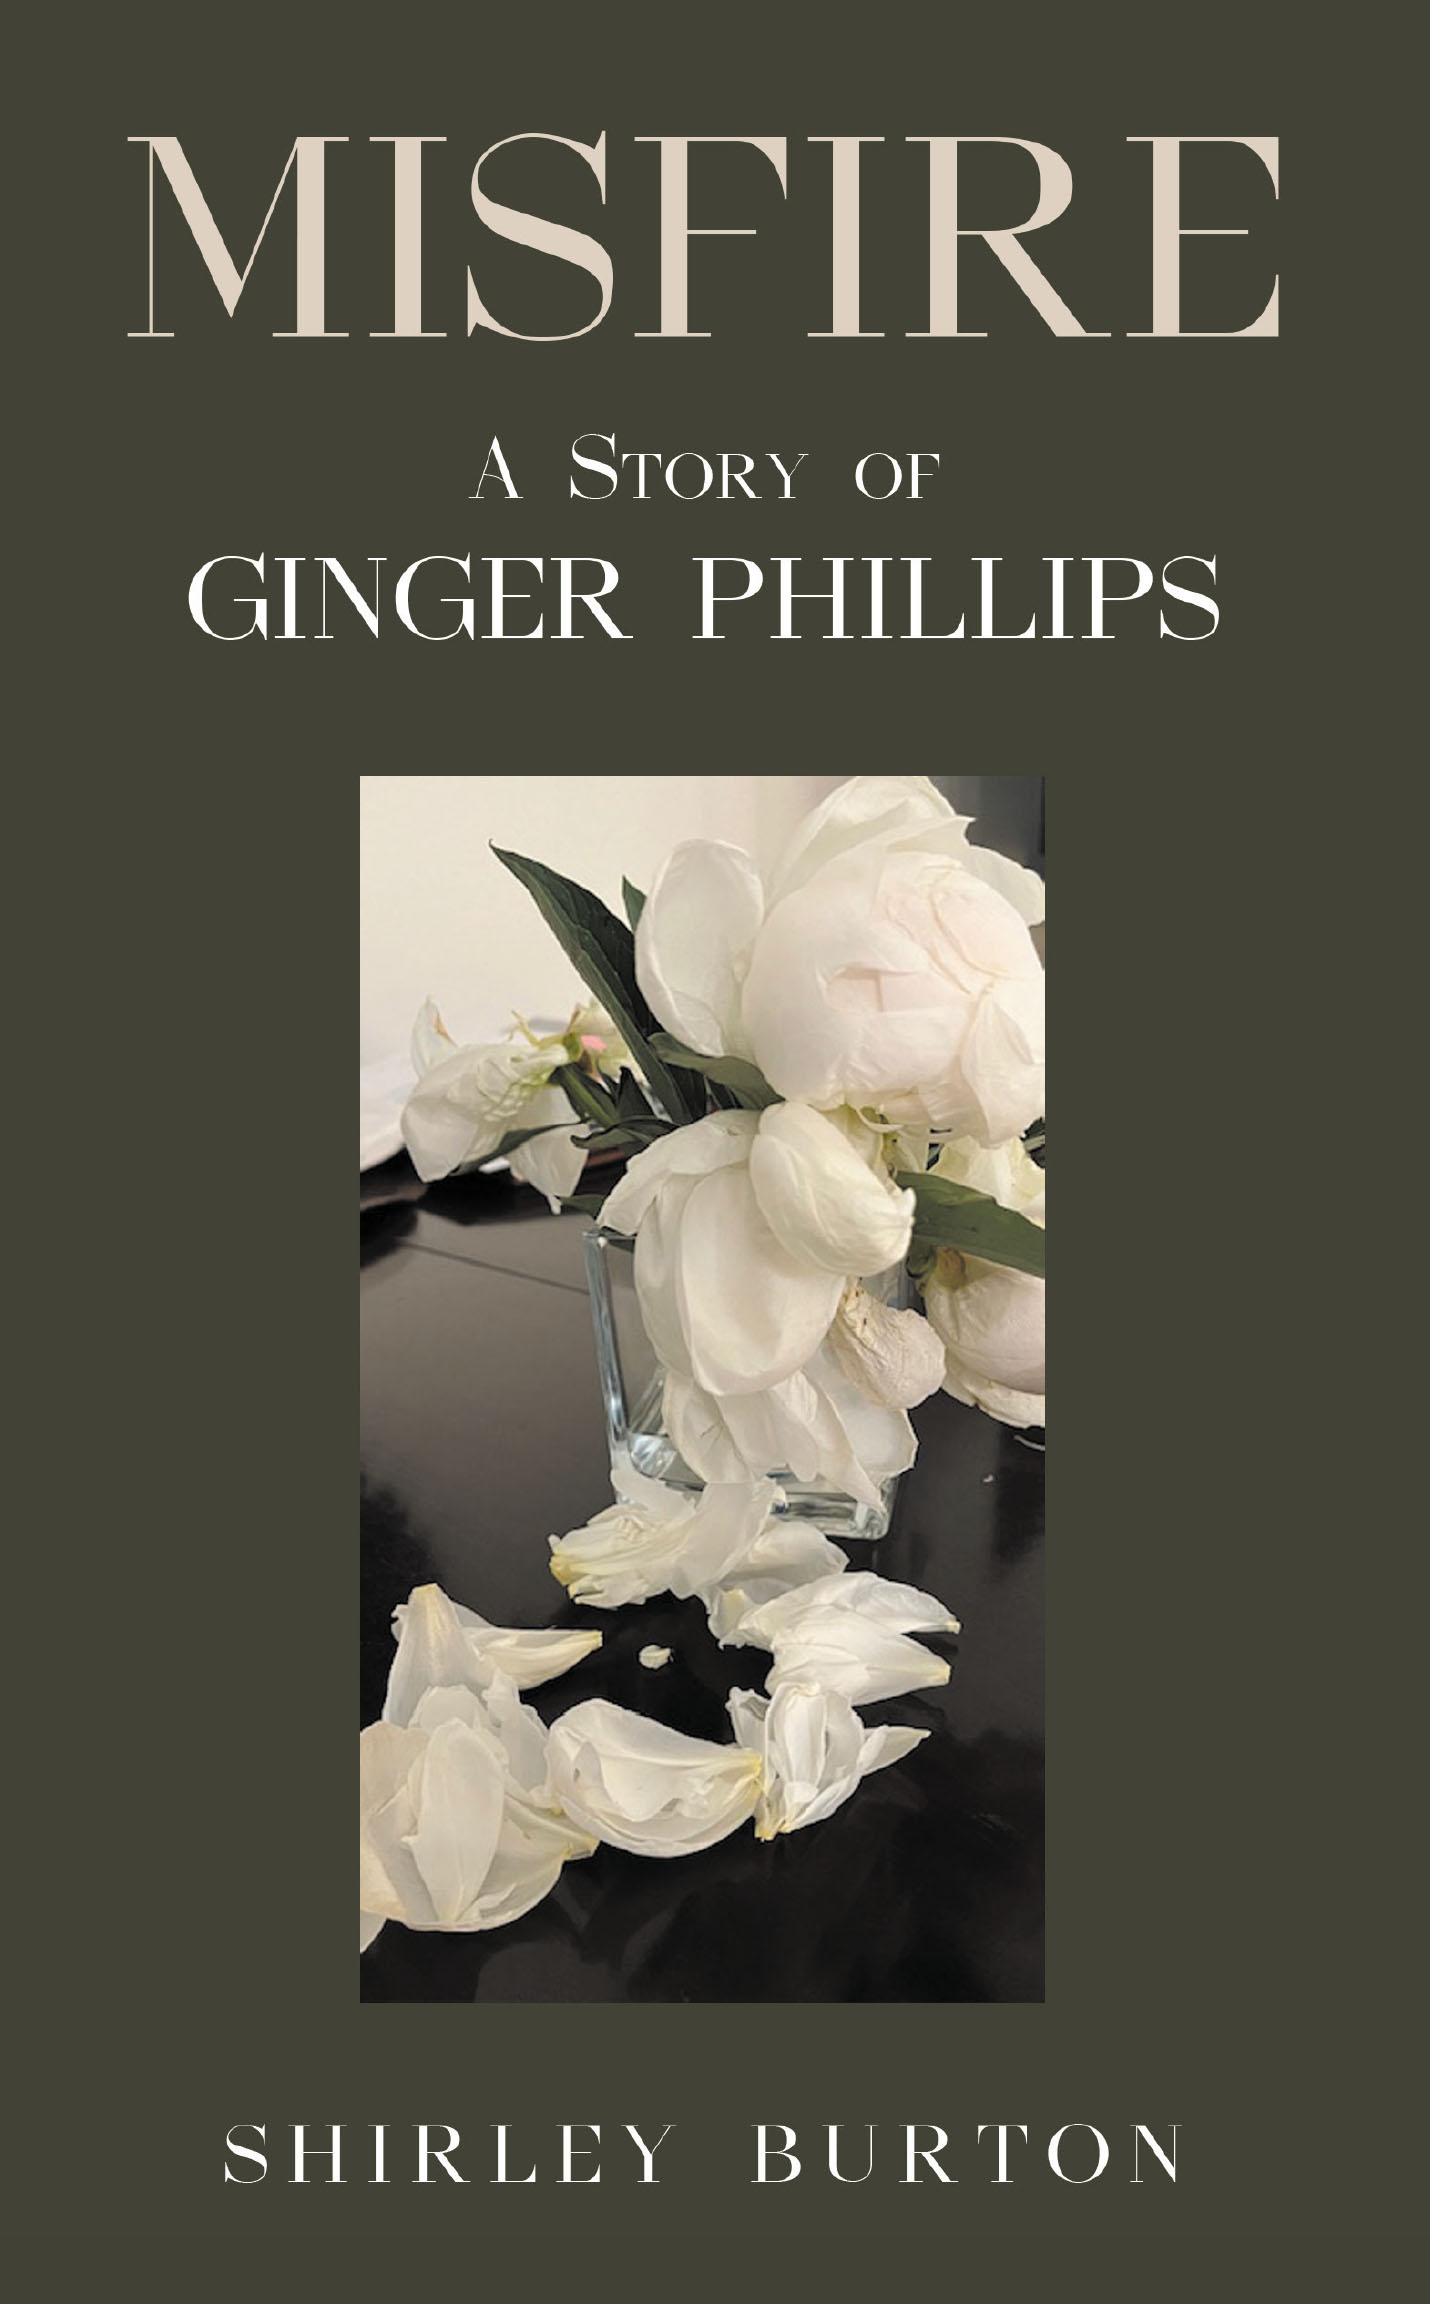 Shirley Burton’s New Book, "Misfire: a Story of Ginger Phillips," Follows a Couple’s Attempts to Make Their Marriage Work Despite Their Glaring Differences